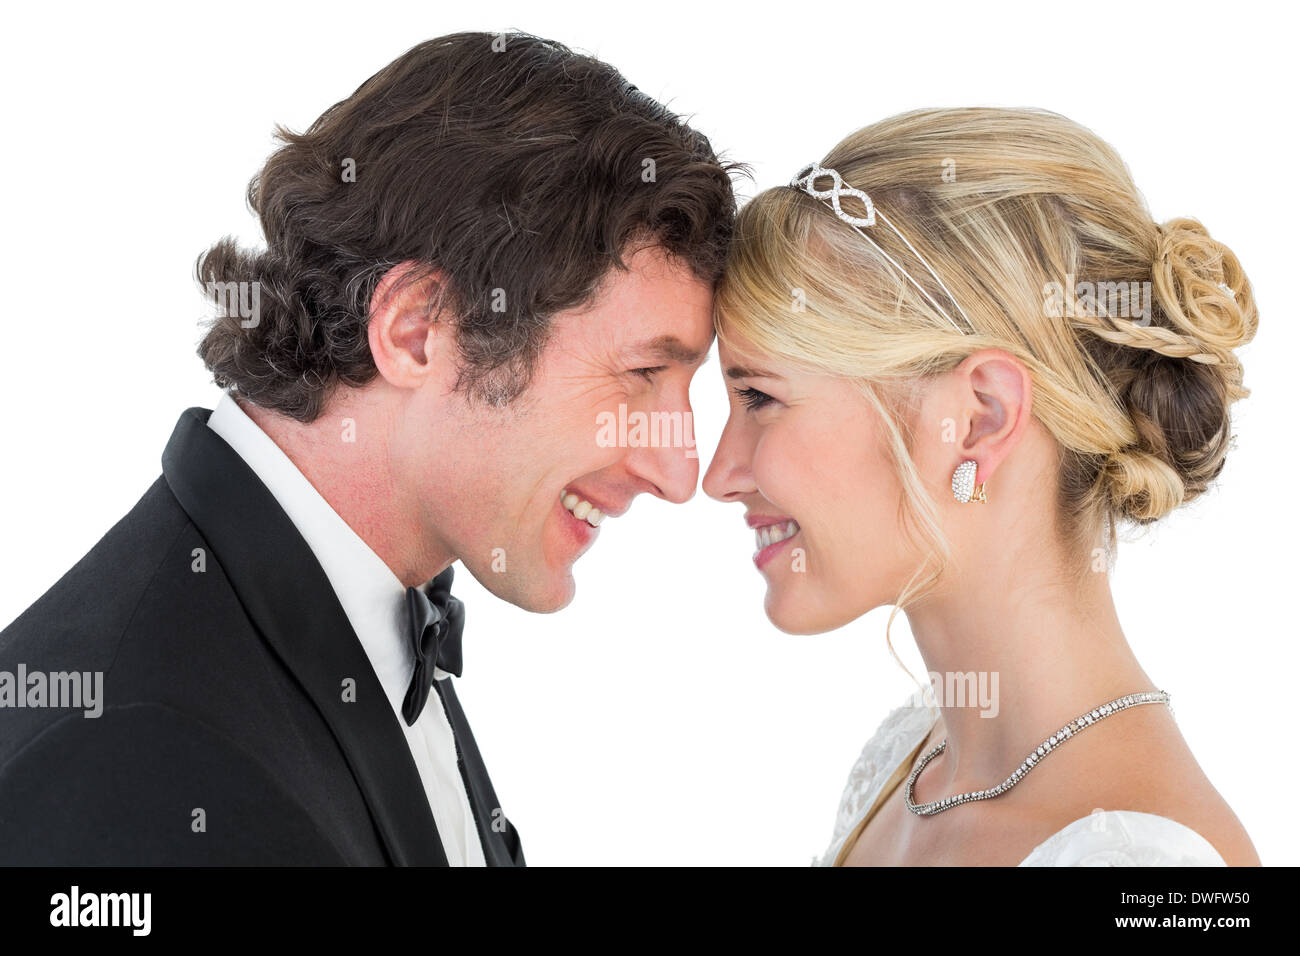 Smiling young couple Banque D'Images